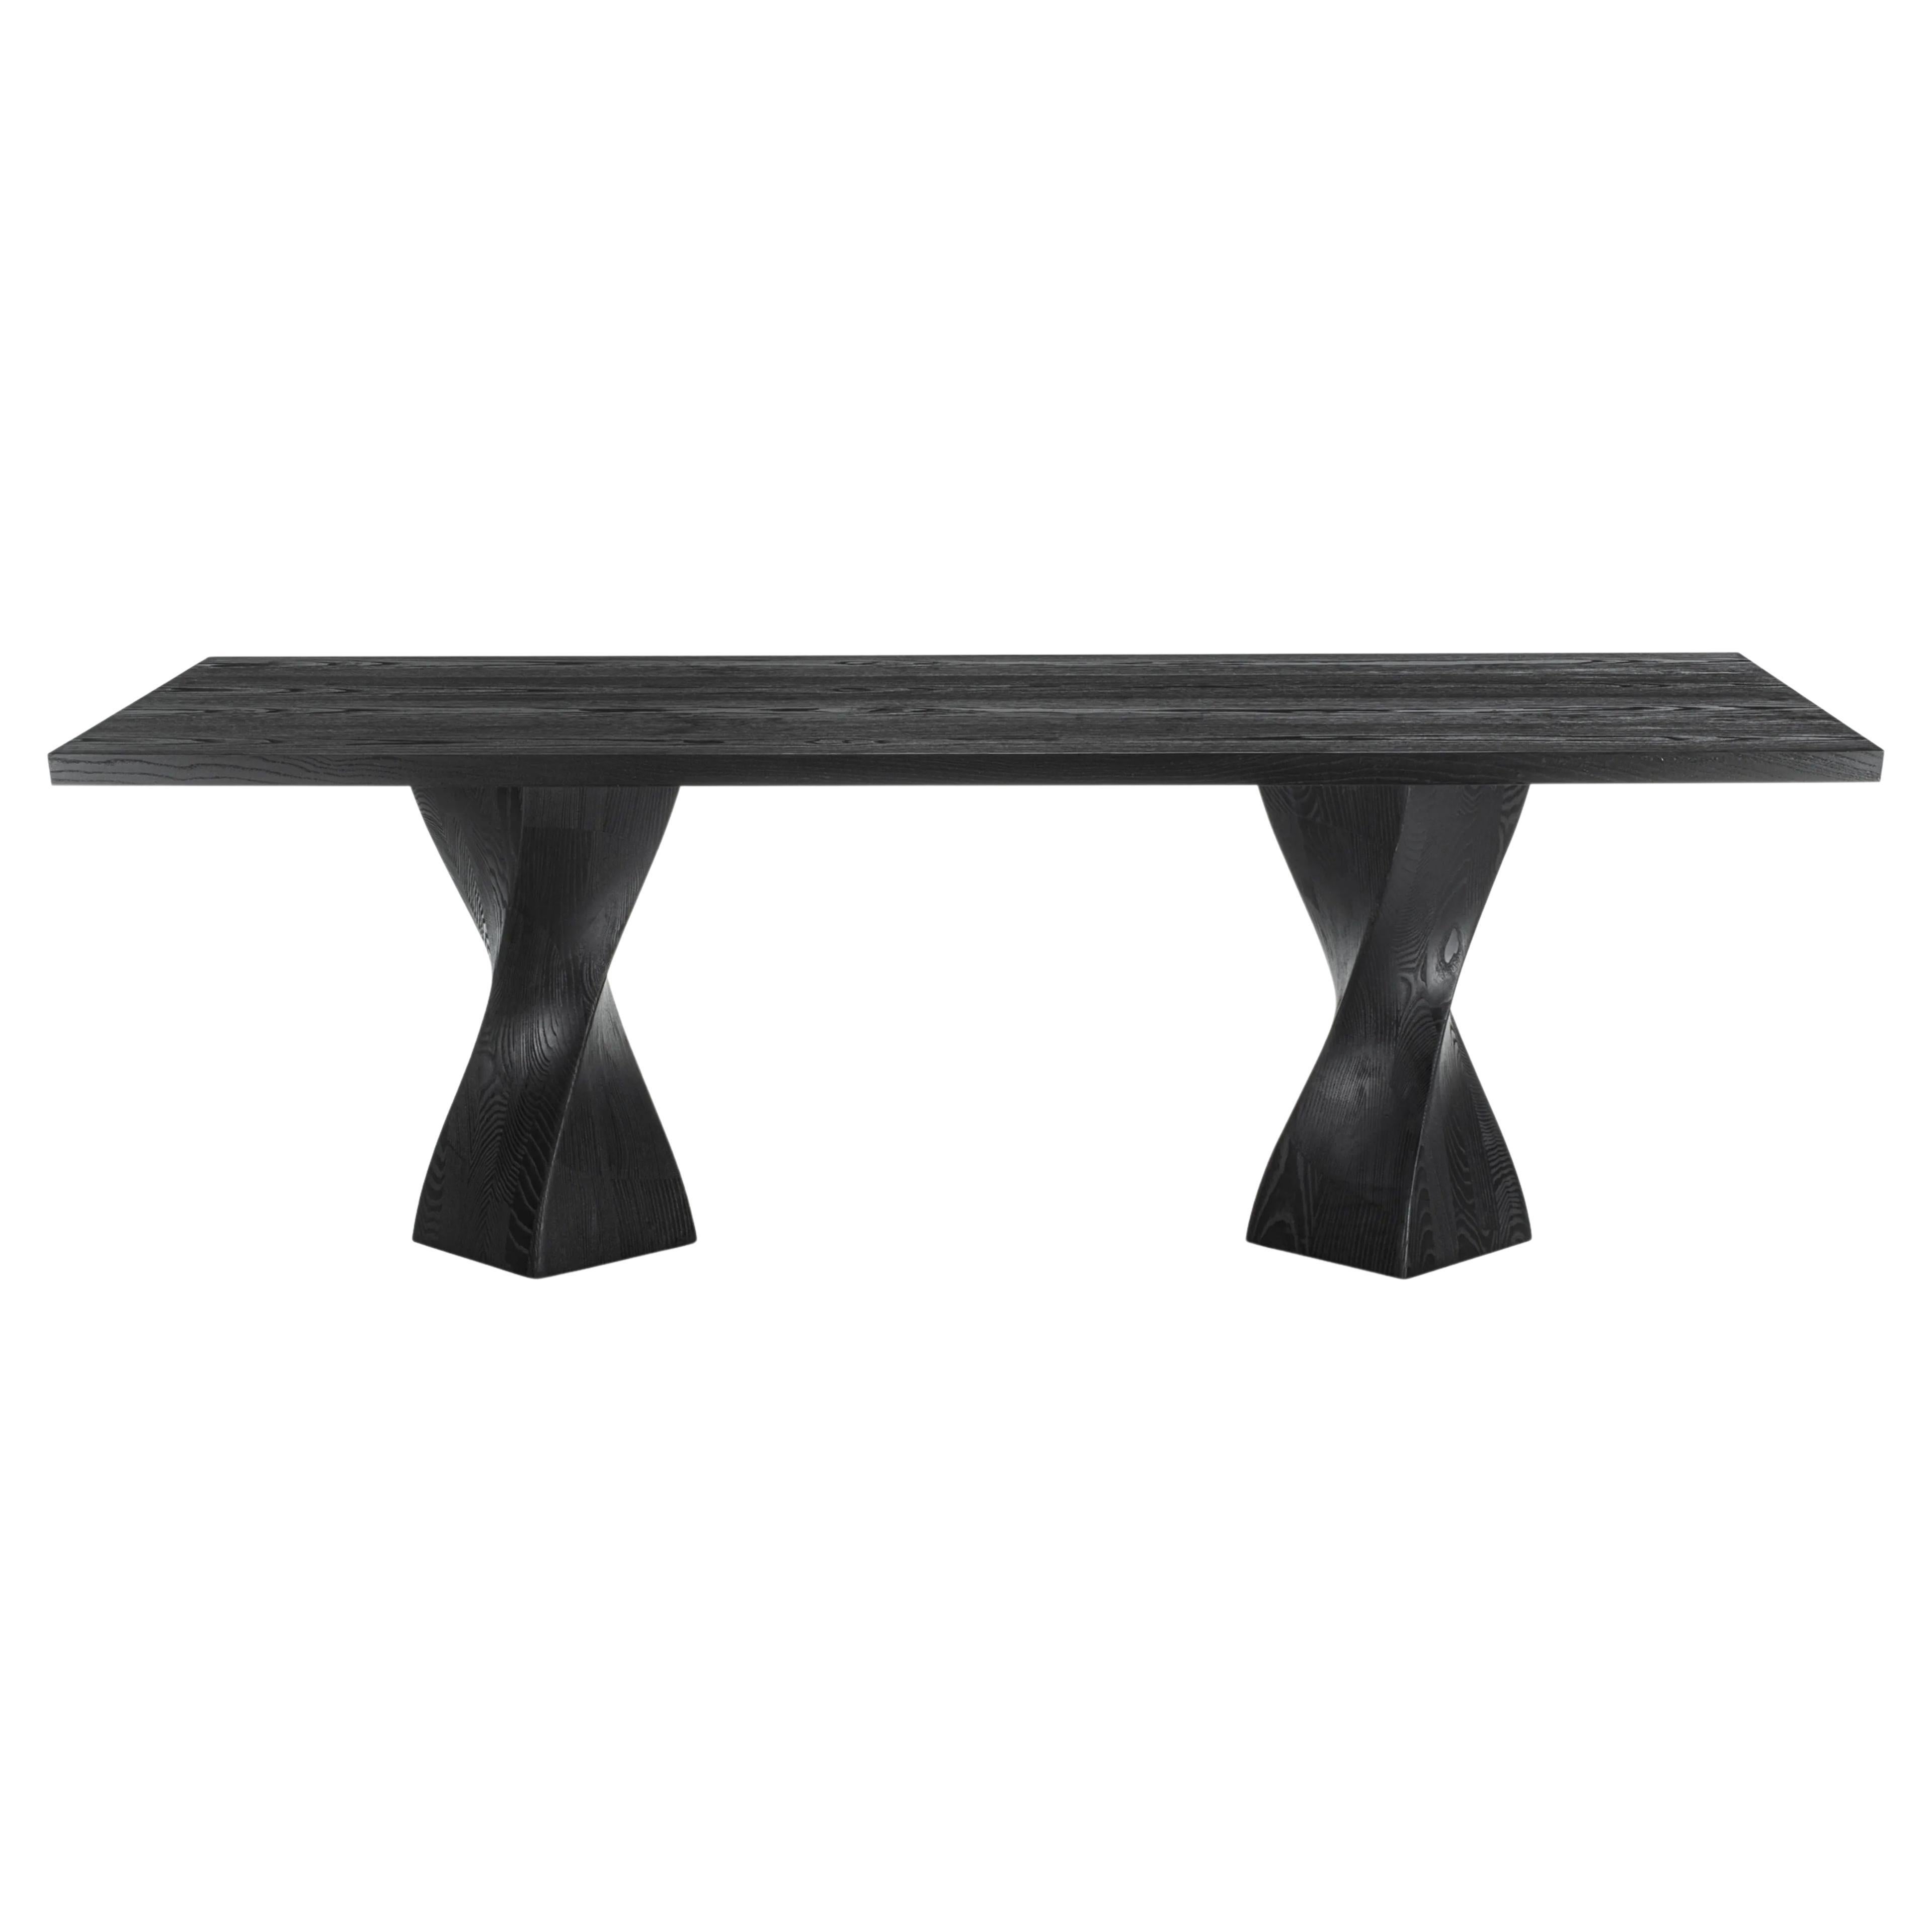 Contemporary Dining Table Ft Beveled Edges And Twisted Legs For Sale